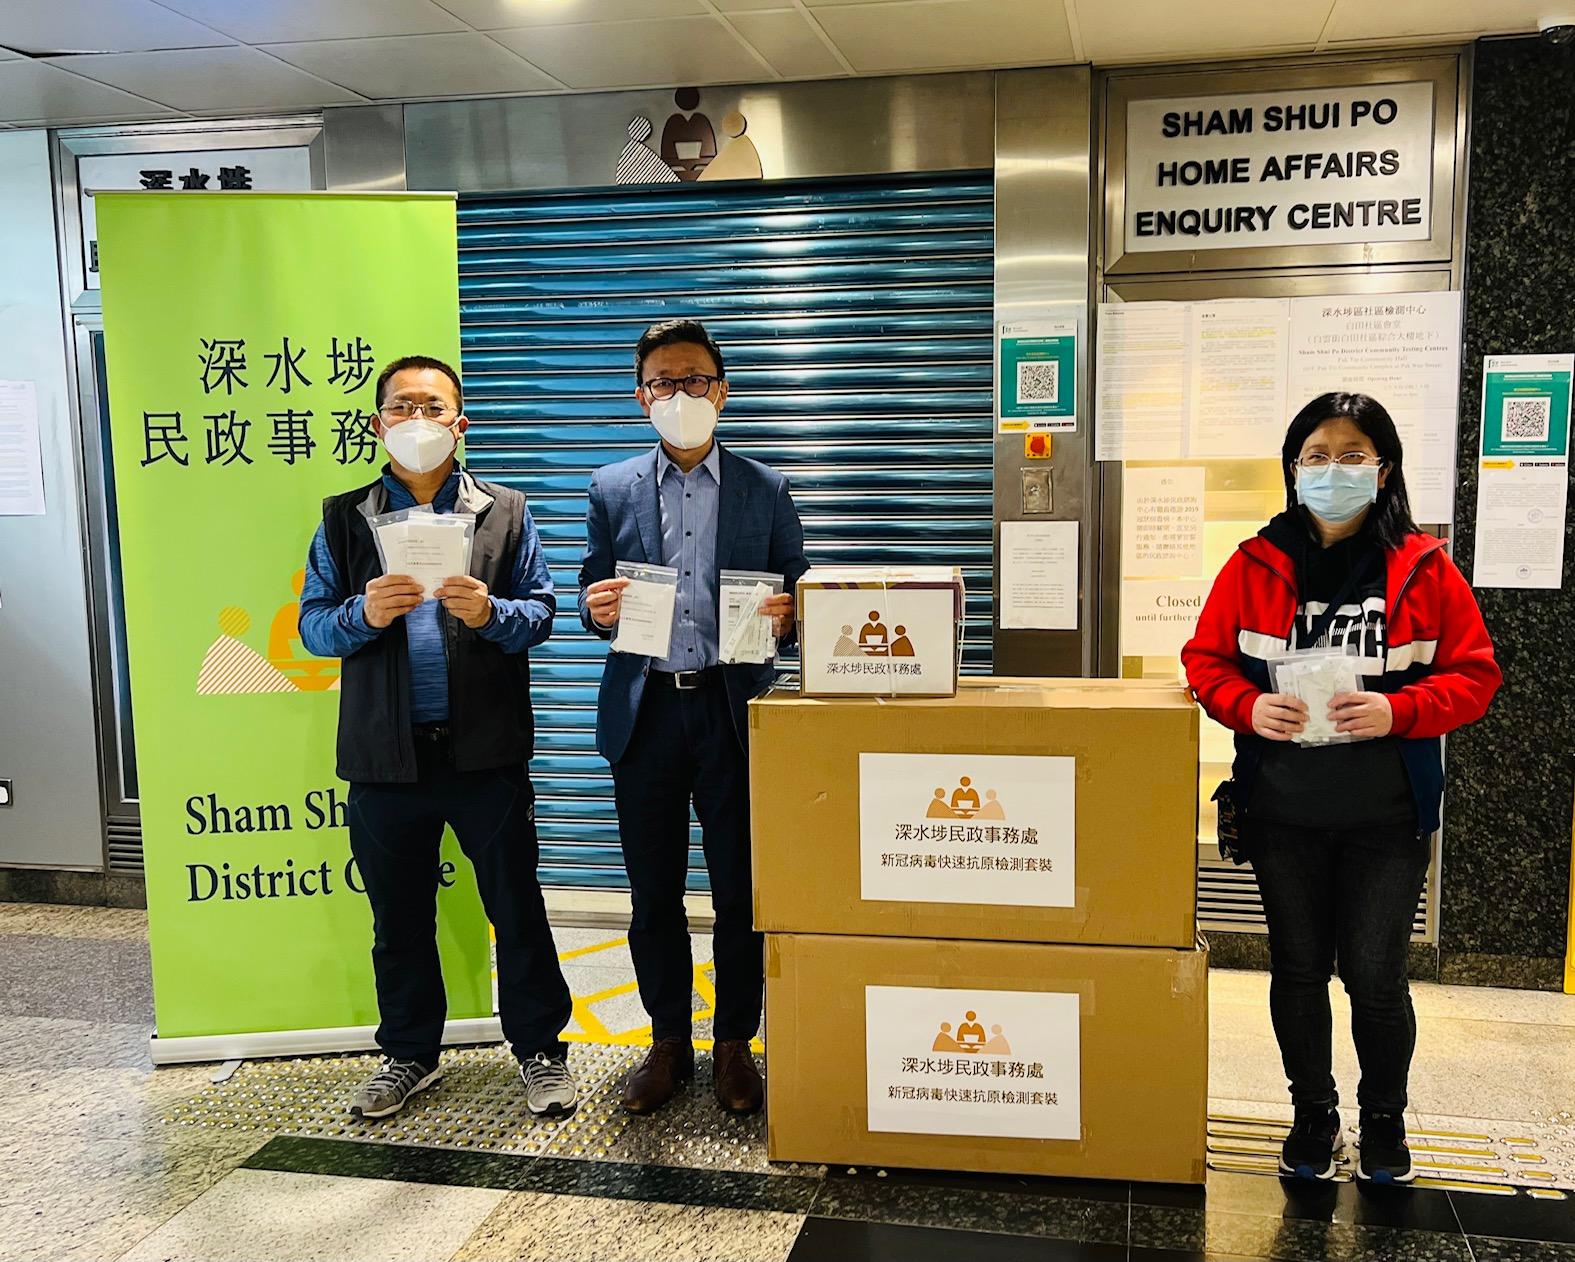 The Sham Shui Po District Office today (March 3) distributed COVID-19 rapid test kits to households, cleansing workers and property management staff living and working in So Uk Estate and Hoi Ying Estate for voluntary testing through the property management companies.